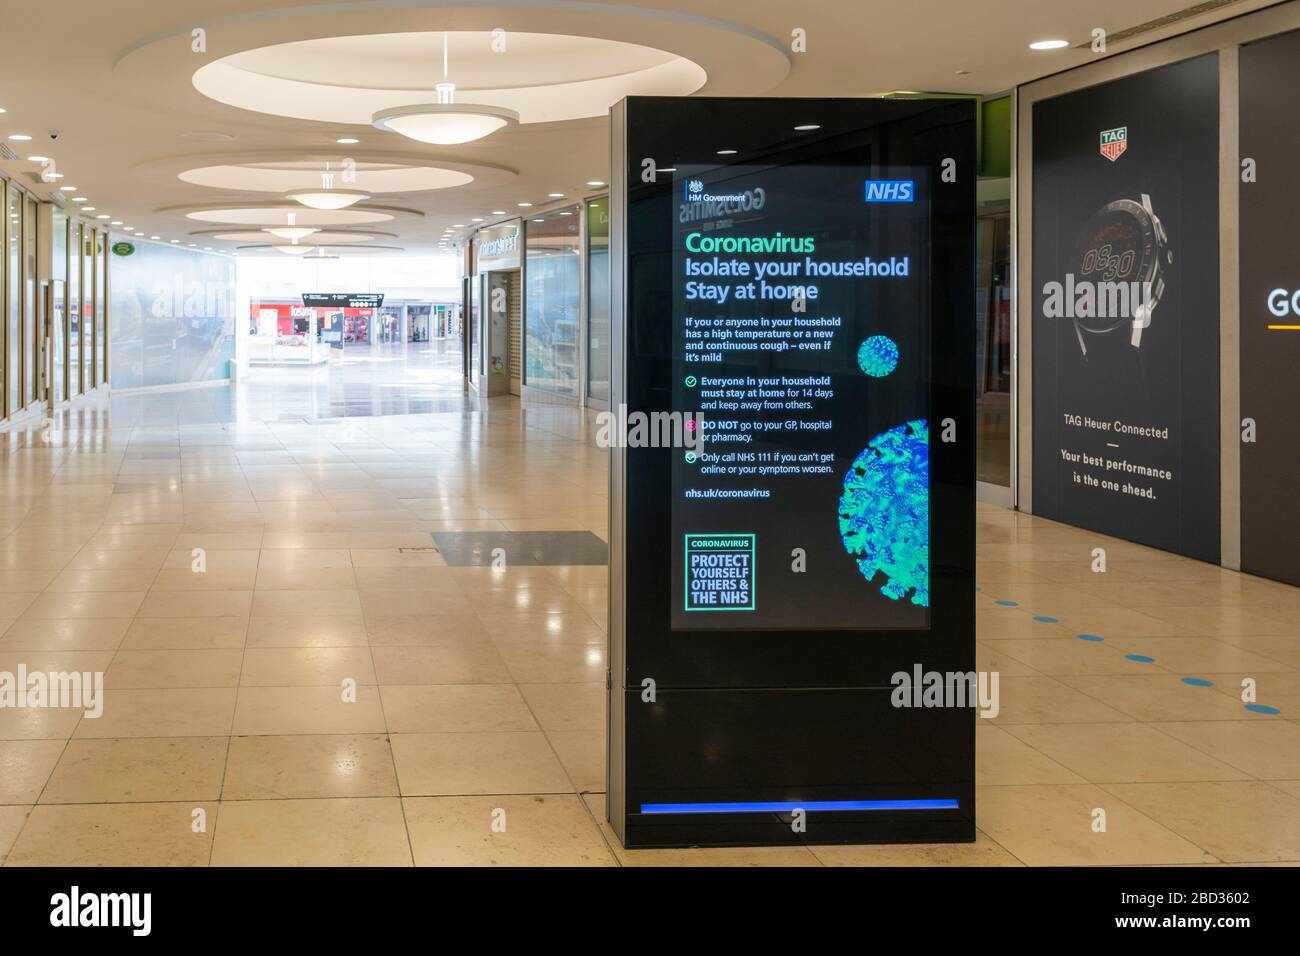 Official HM Government warning notice about Coronavirus Covid-19 is displayed in an empty Festival Place shopping centre, Basingstoke, UK, April 2020 Stock Photo